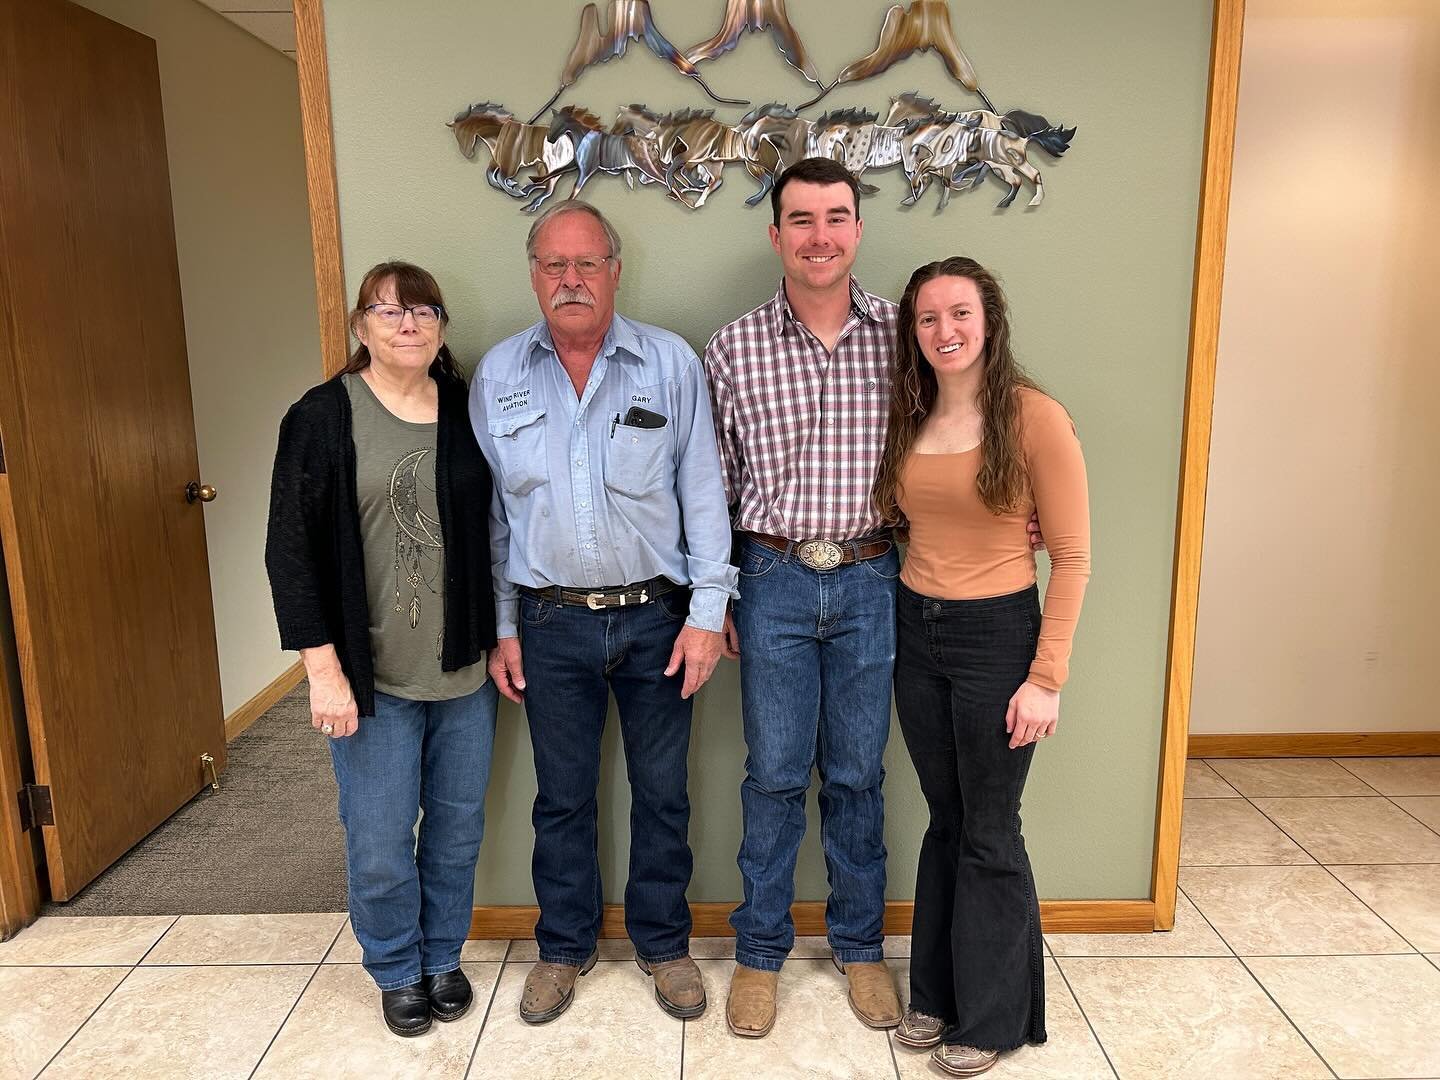 The official transfer of Wind River Aviation from Gary &amp; Loretta Loose to Sam &amp; Abbi Rodgers occurred last week. Help us welcome Sam and thank Gary by commenting below! Wind River Aviation: maintaining excellence since 1994 #aviation #aviatio